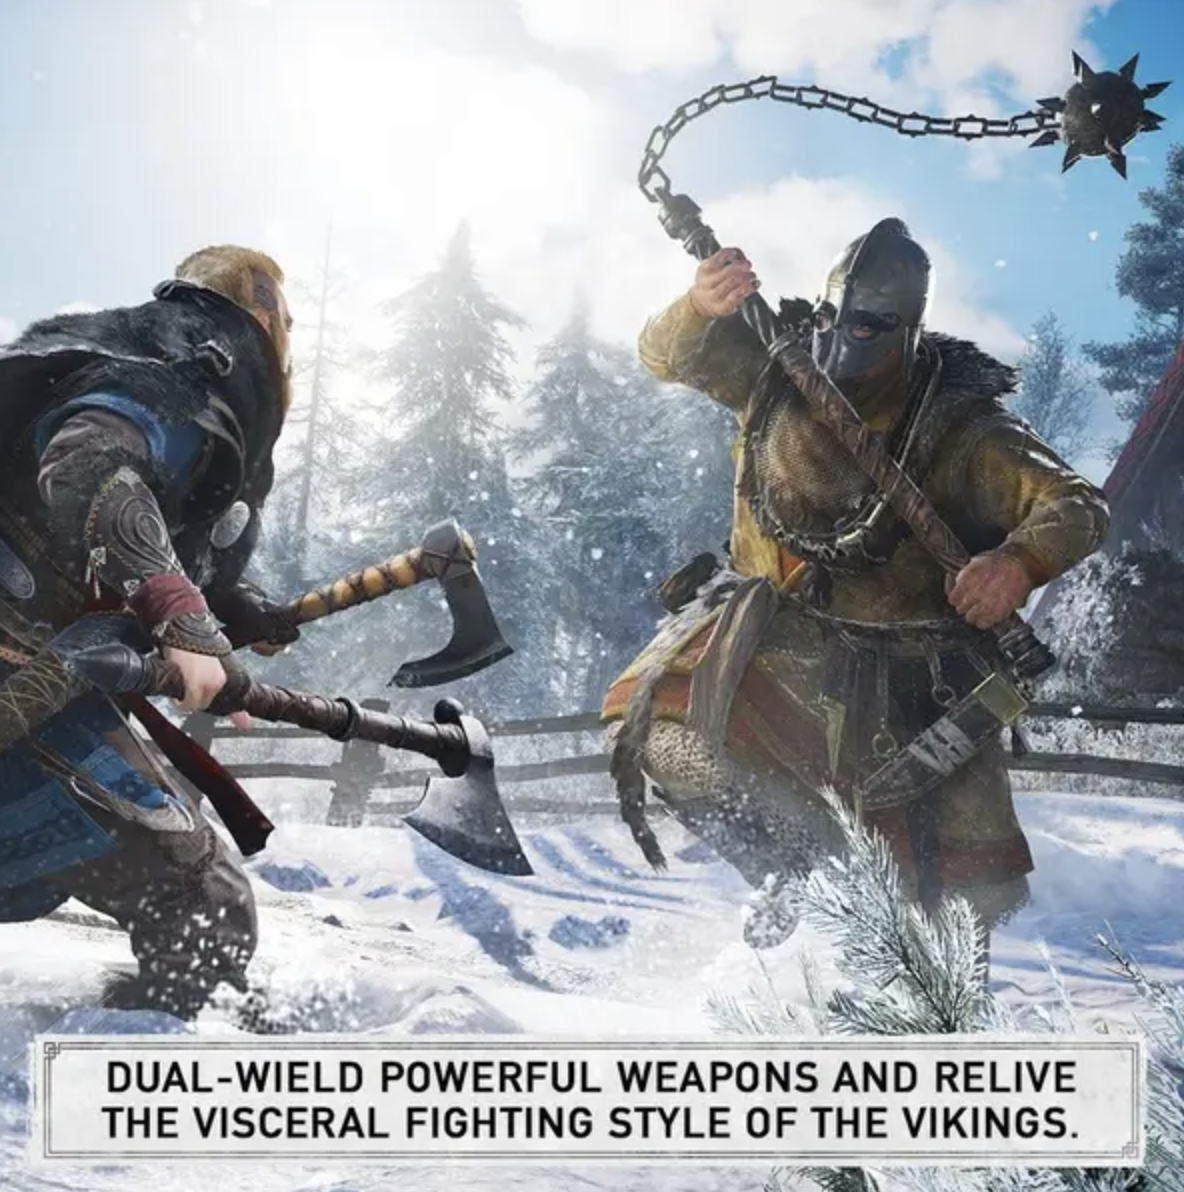 Vikings in combat with the text &quot;Dual-weird powerful weapons and relive the visceral fighting style of the vikings&quot;